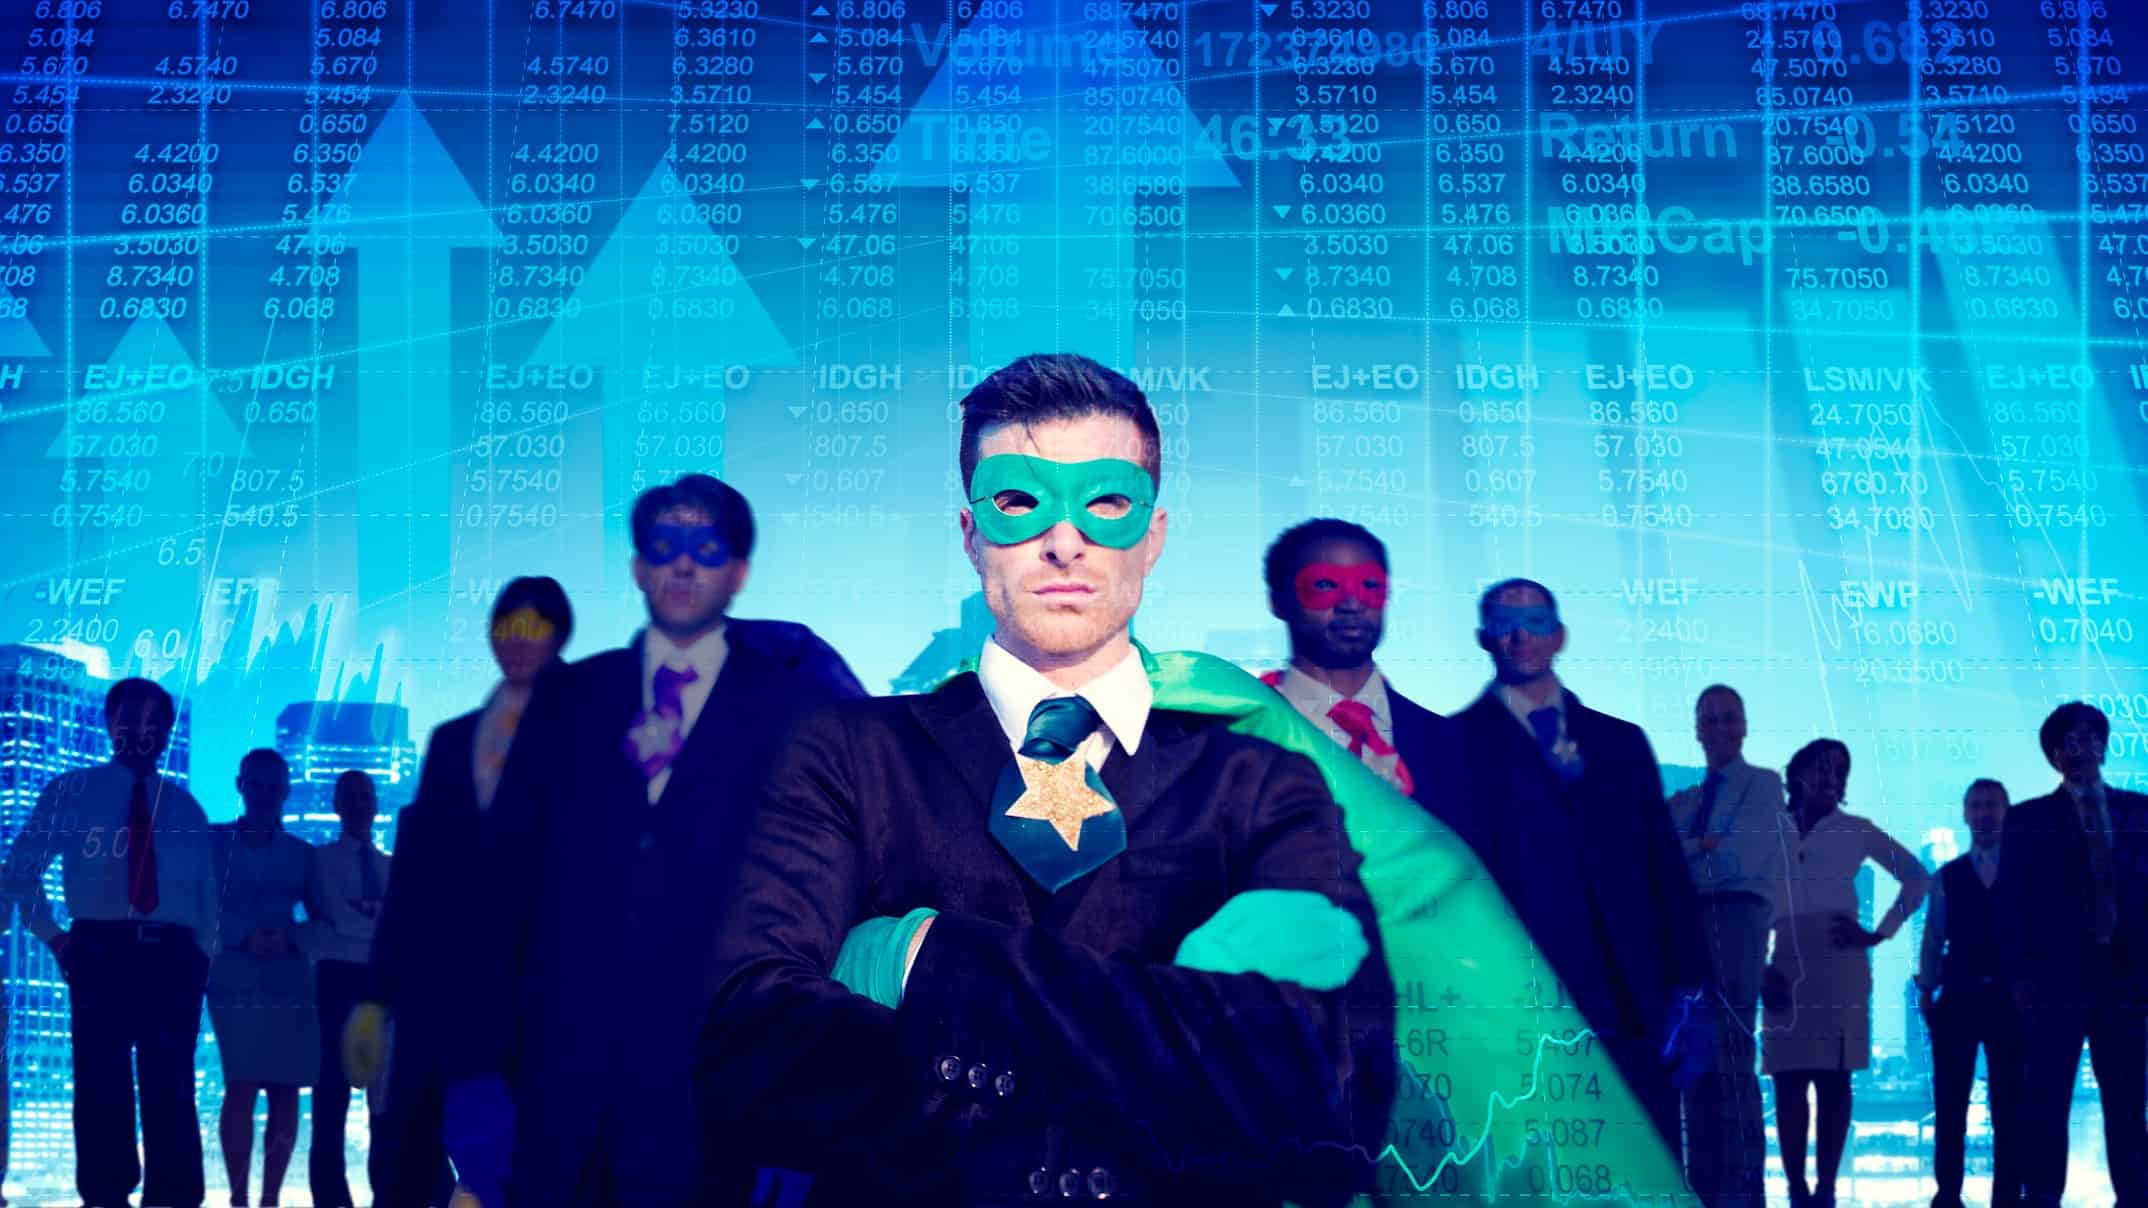 Heroes in masks and capes stand before the ASX share market, ready to save the day